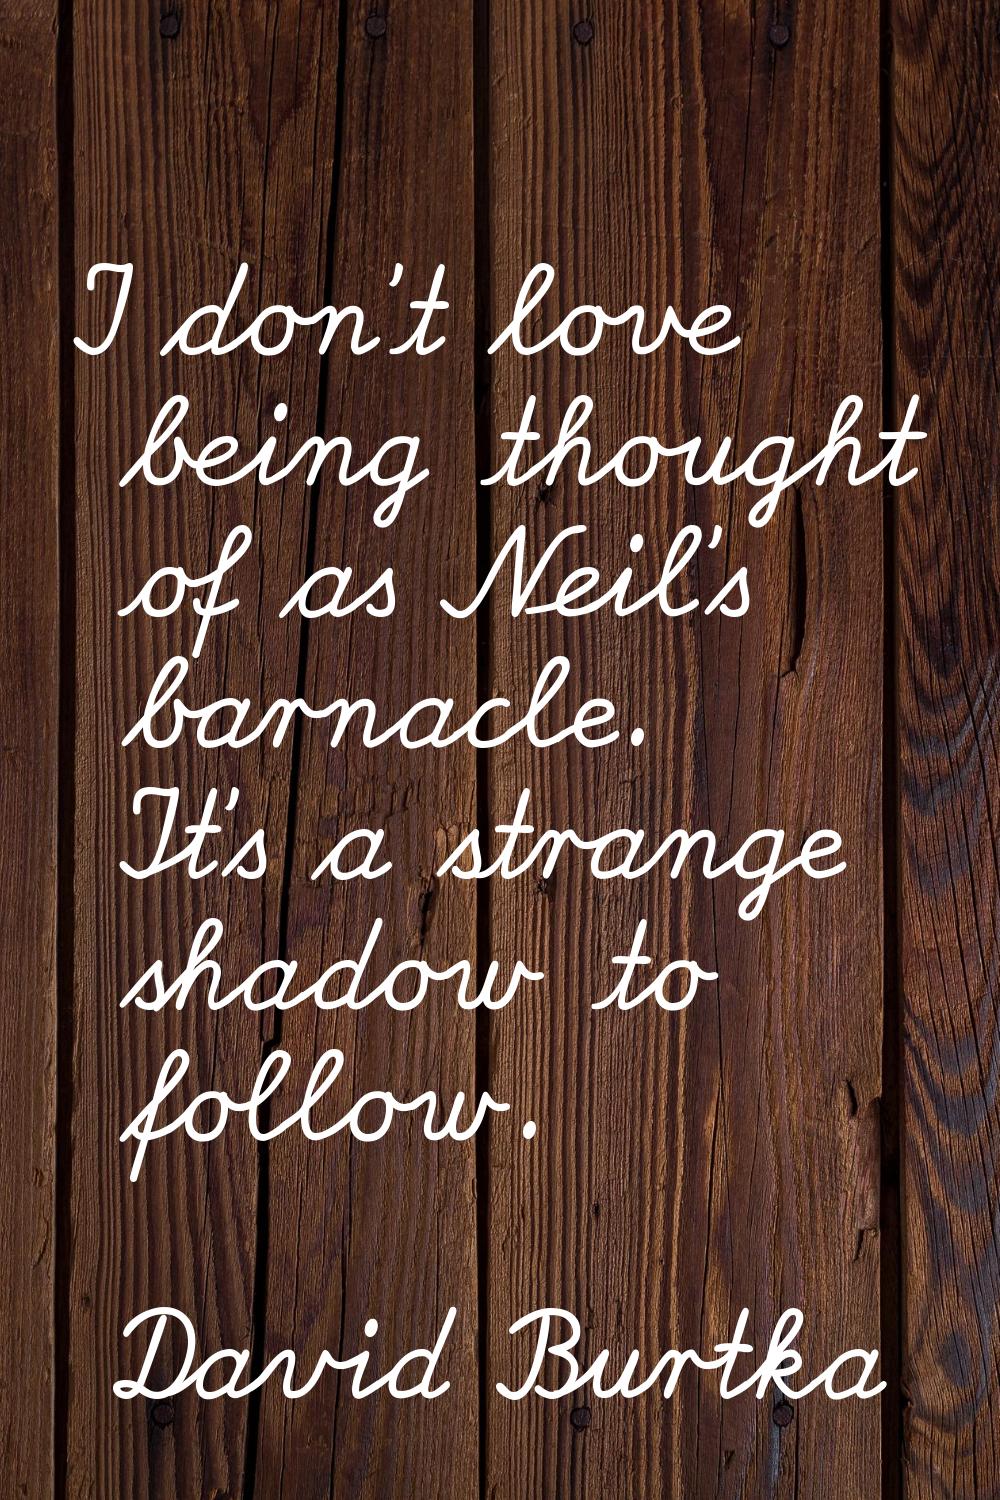 I don't love being thought of as Neil's barnacle. It's a strange shadow to follow.